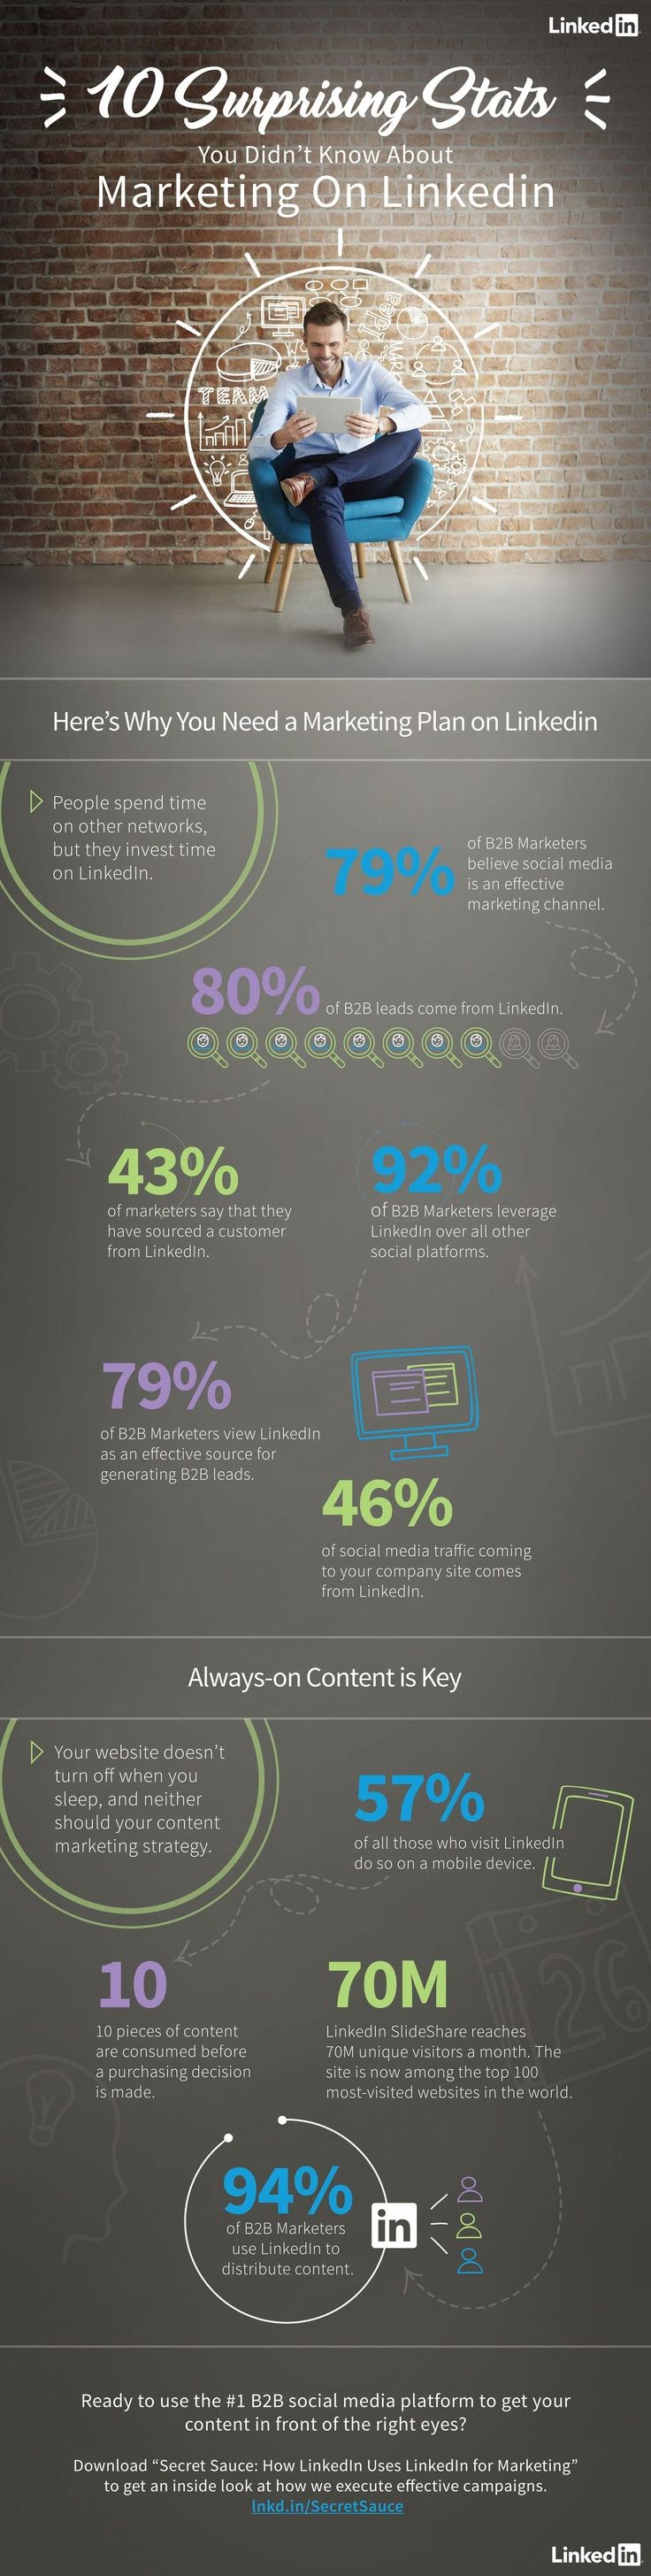 10 Surprising Stats You Didn’t Know About Marketing on LinkedIn #Infographic